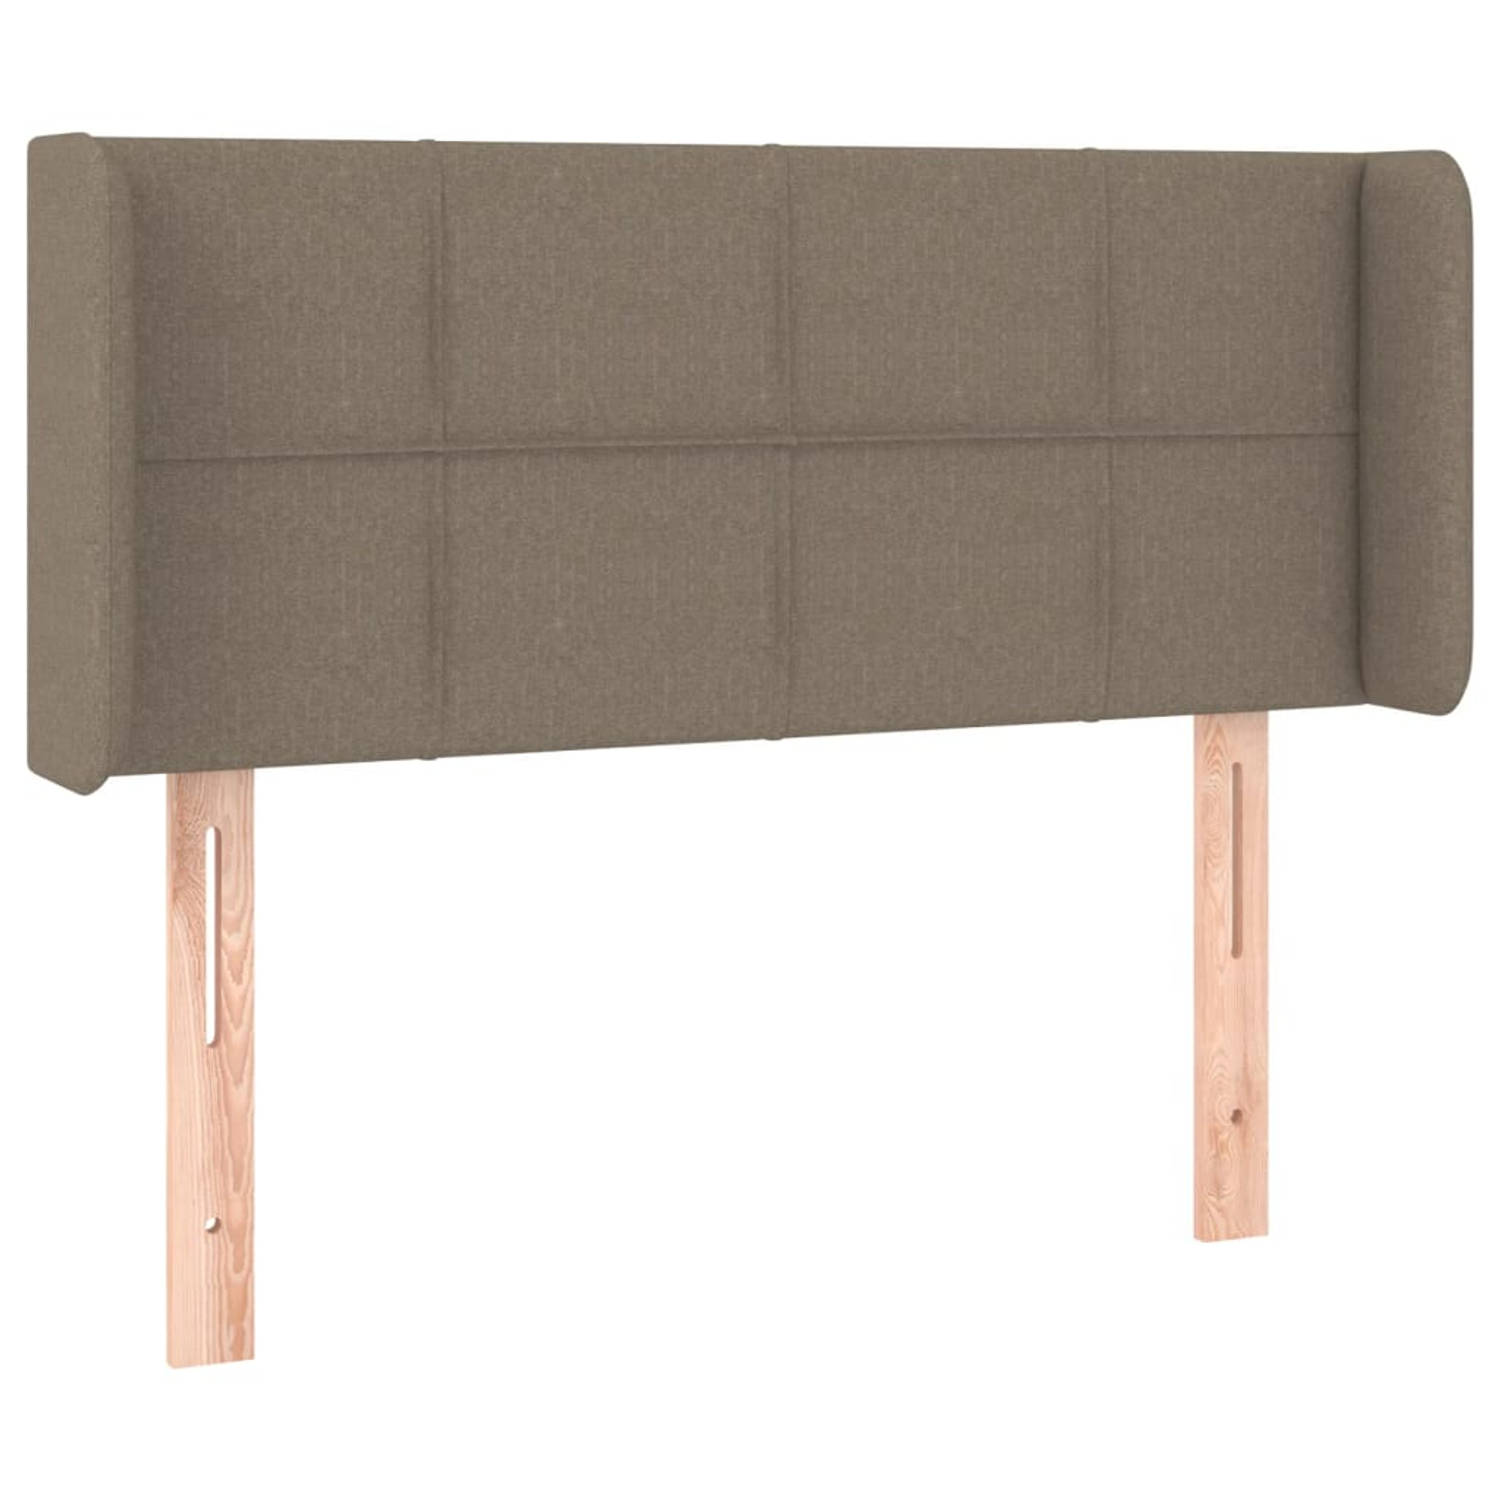 The Living Store Hoofdbord Trendy Design - Bedombouw - 93 x 16 x 78/88 cm - Taupe - Stof - Hout